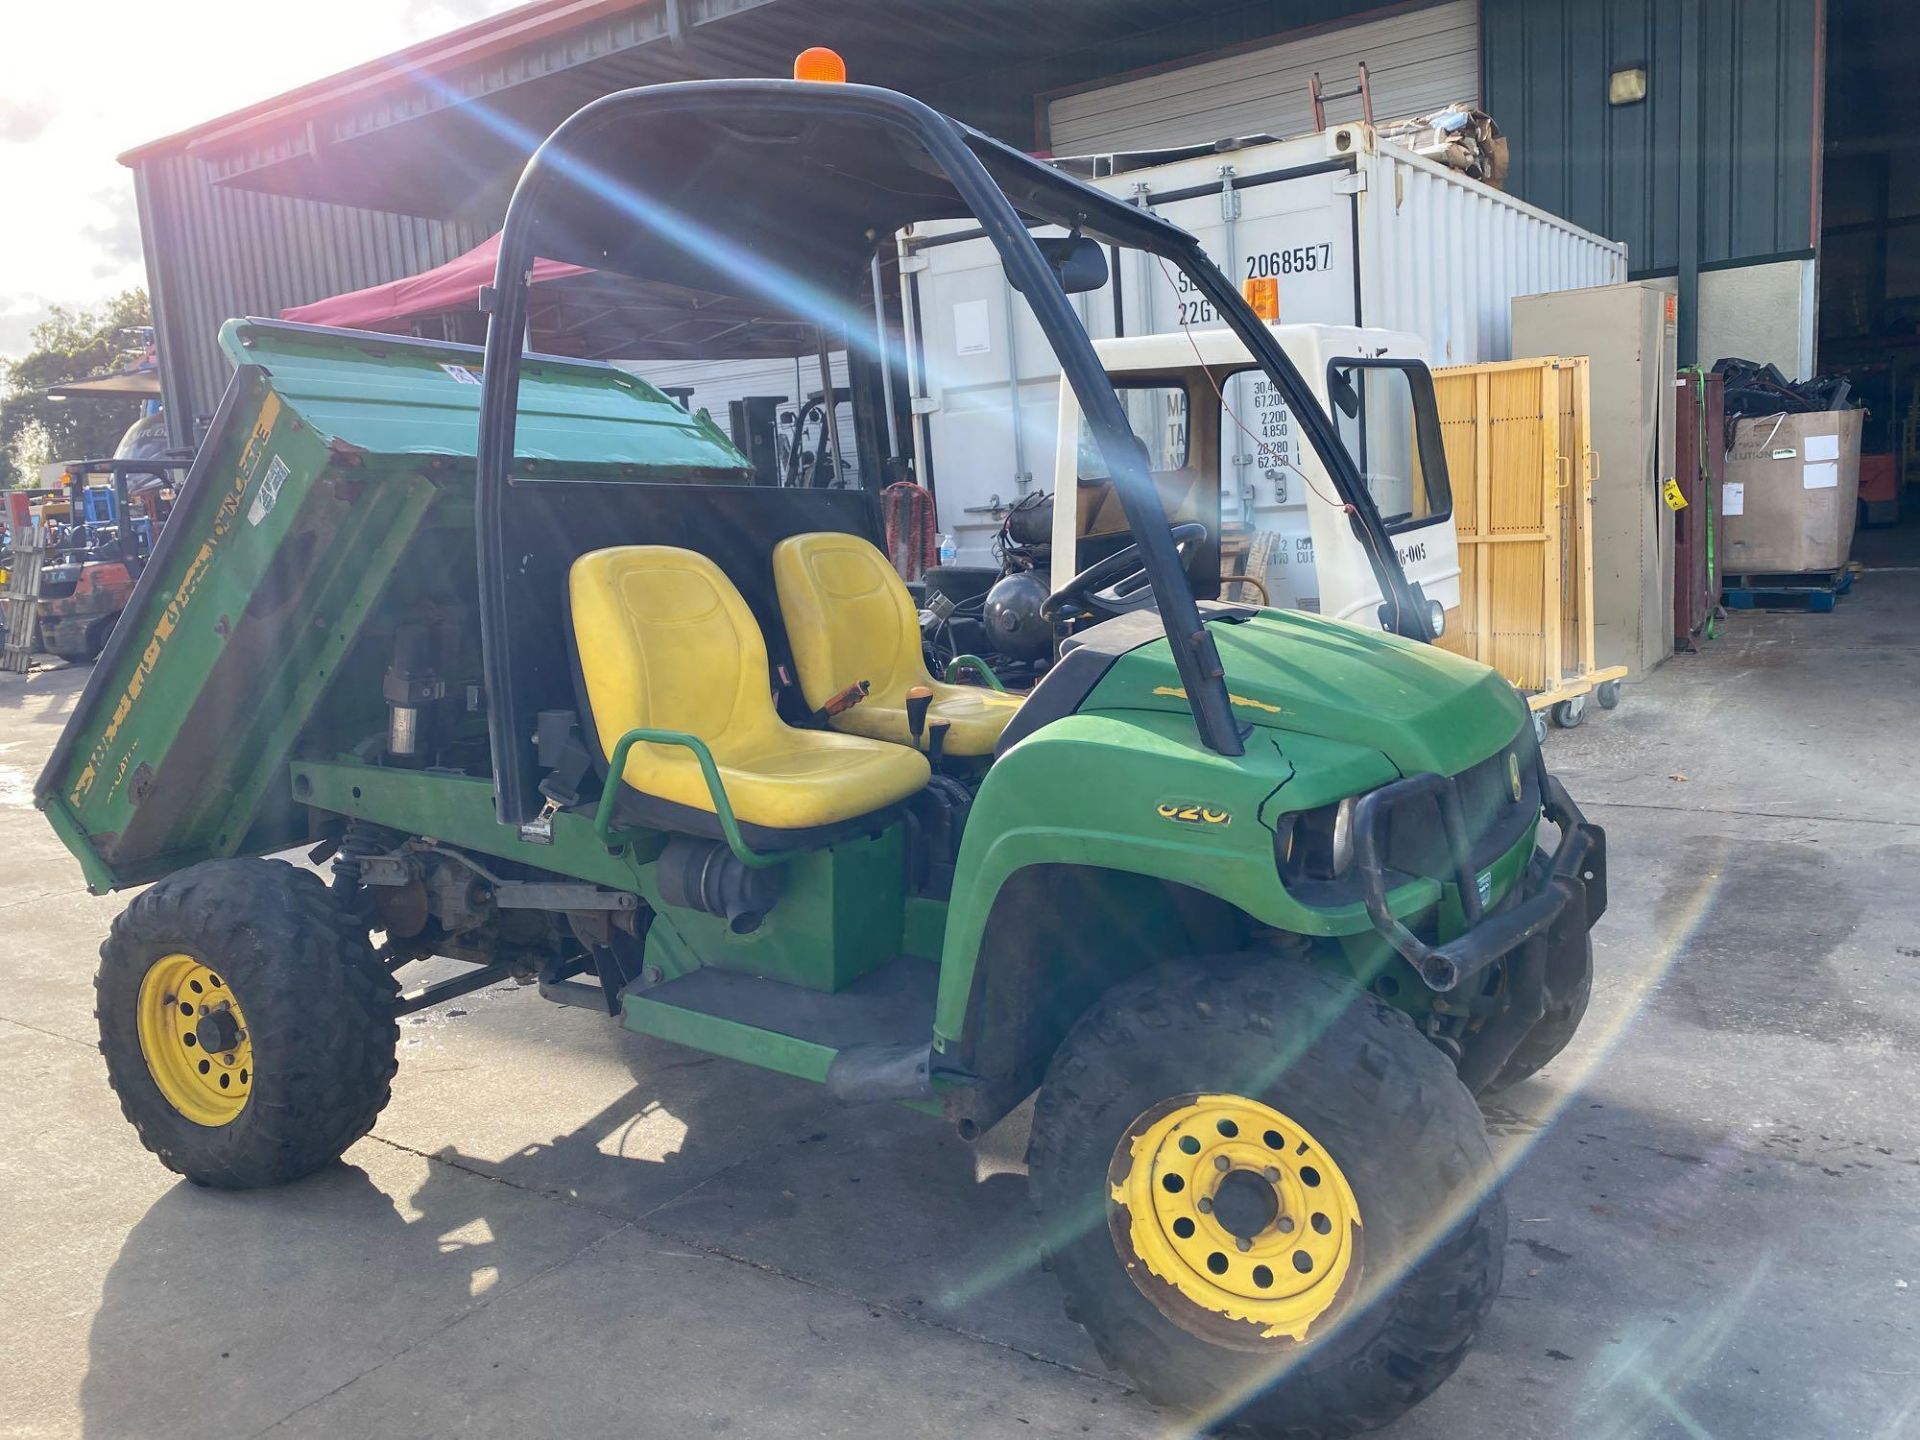 JOHN DEERE GATOR XUV UTILITY CART WITH HYDRAULIC DUMP BED, GAS POWERED, 1,713 HOURS SHOWING 4x4 - Image 3 of 9